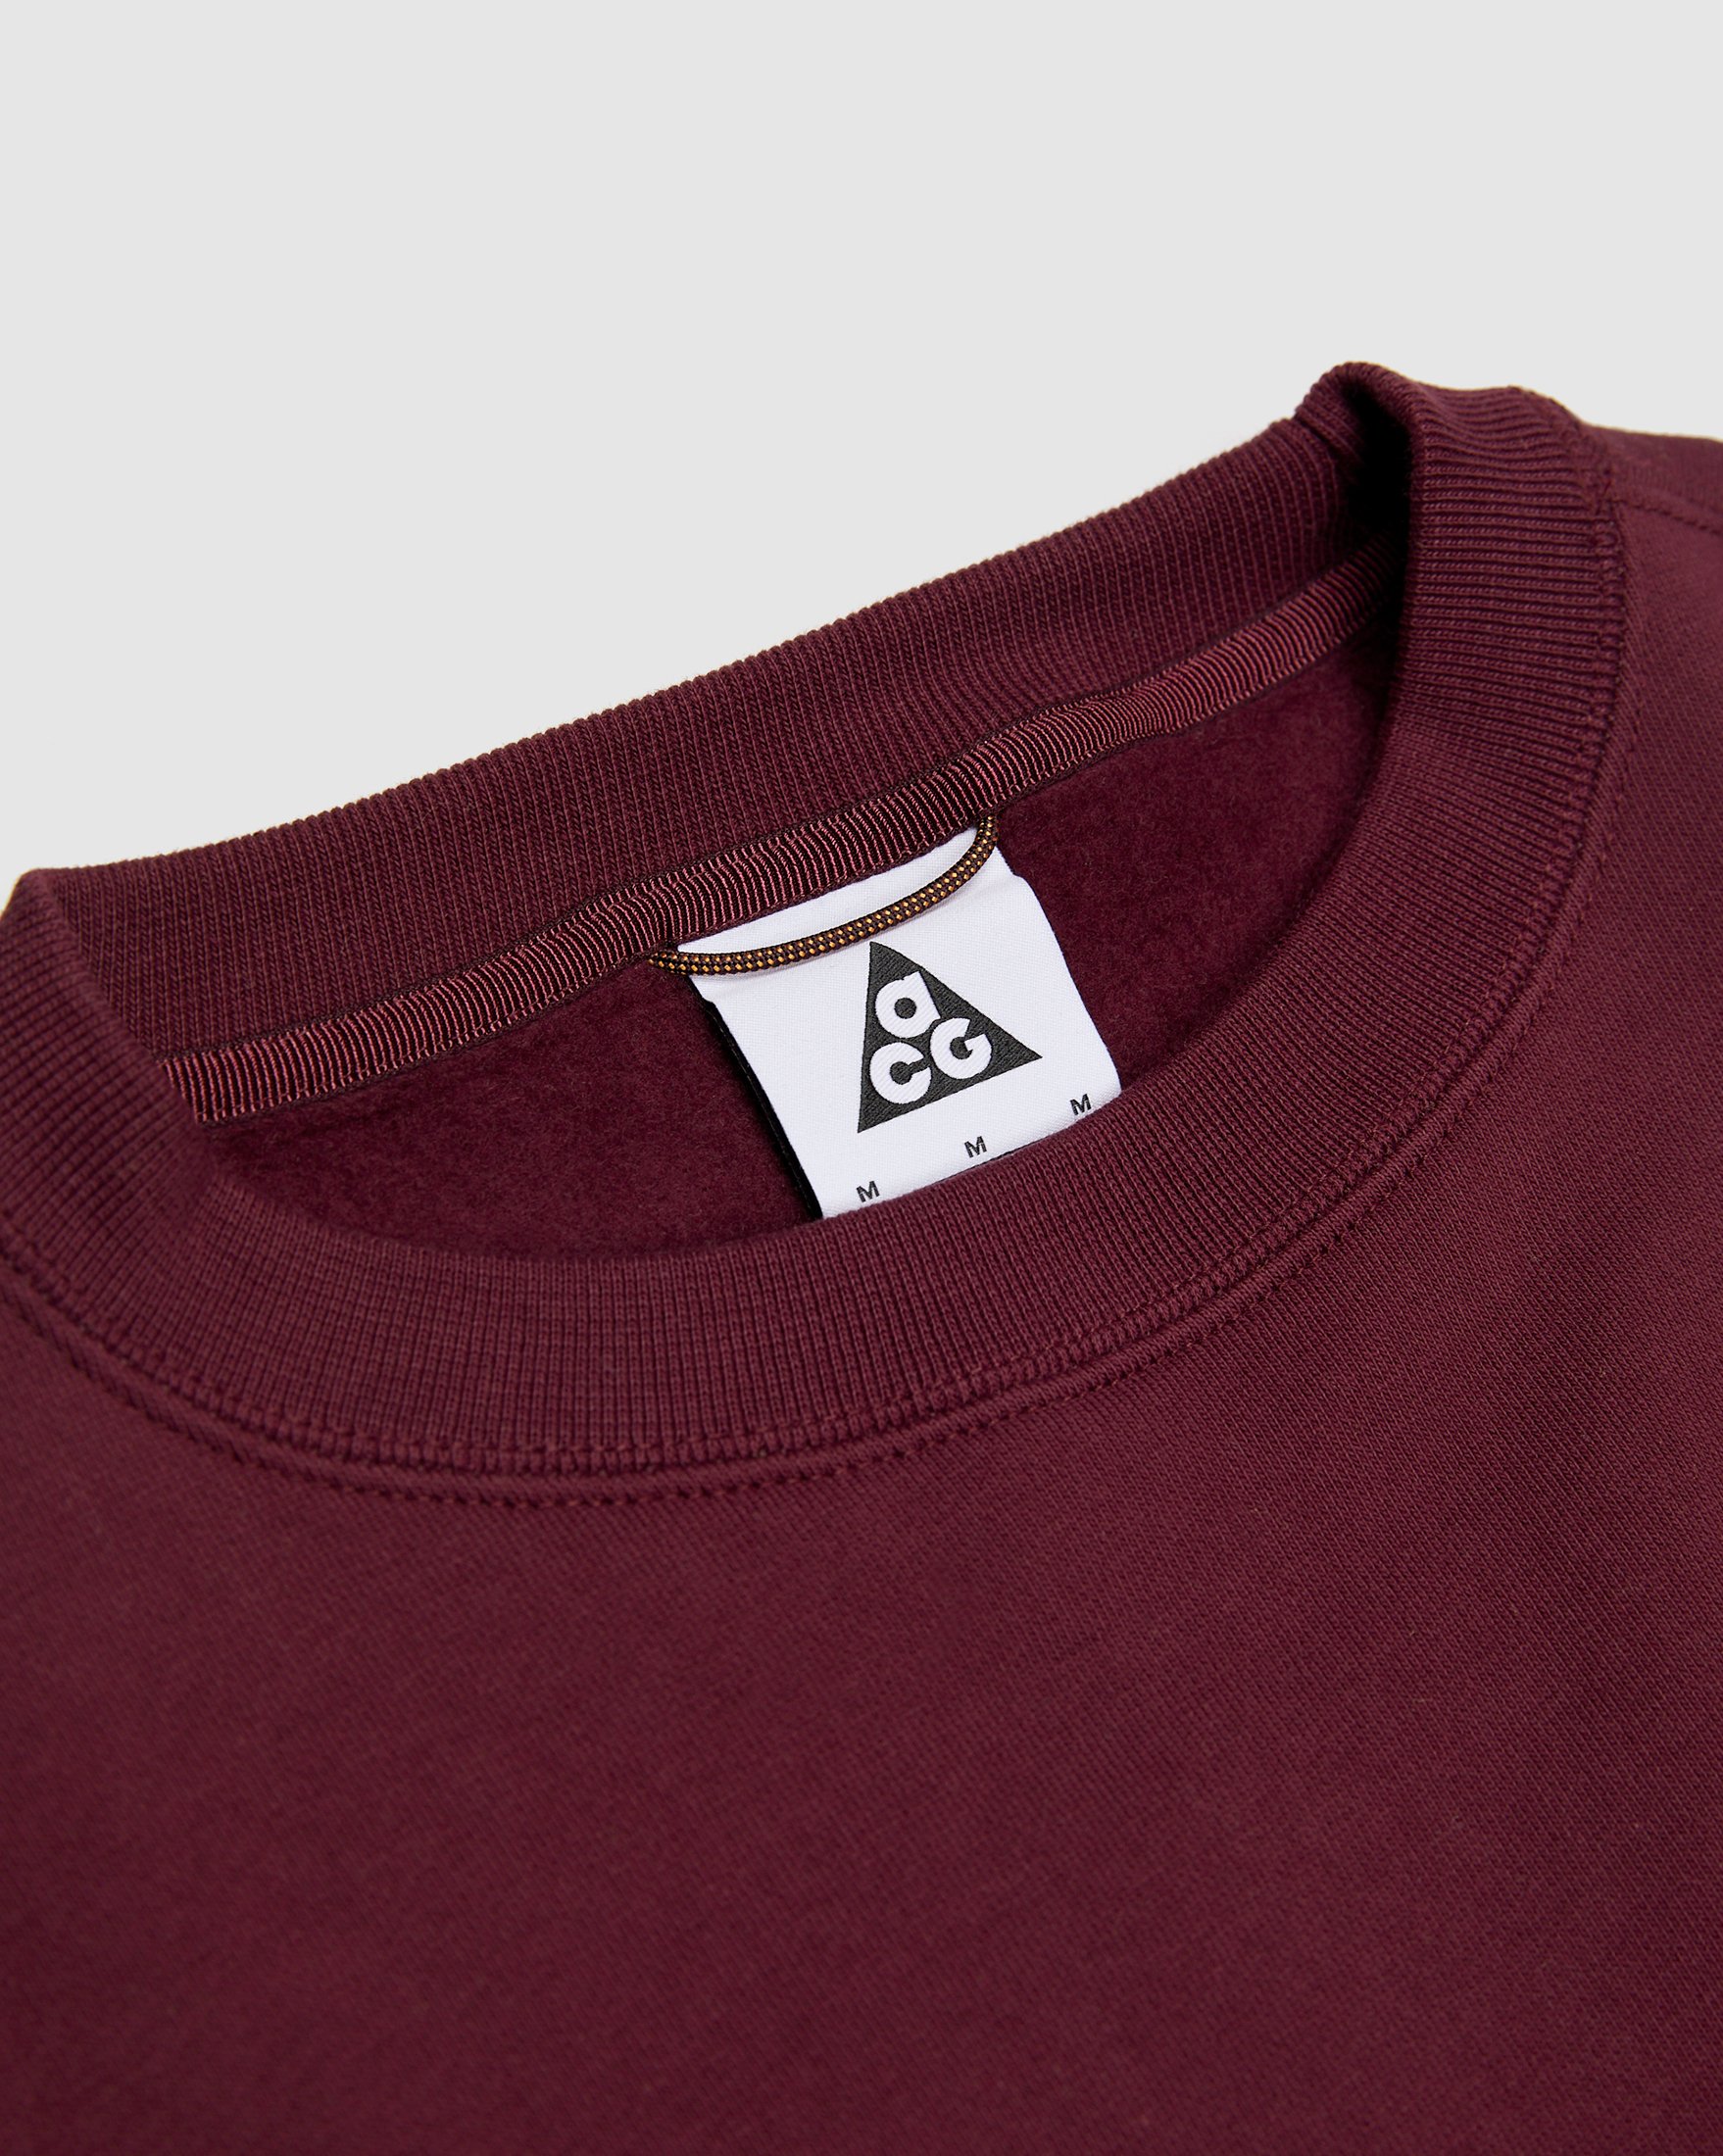 Nike ACG - Allover Print Crew Sweater Burgundy - Clothing - Red - Image 3